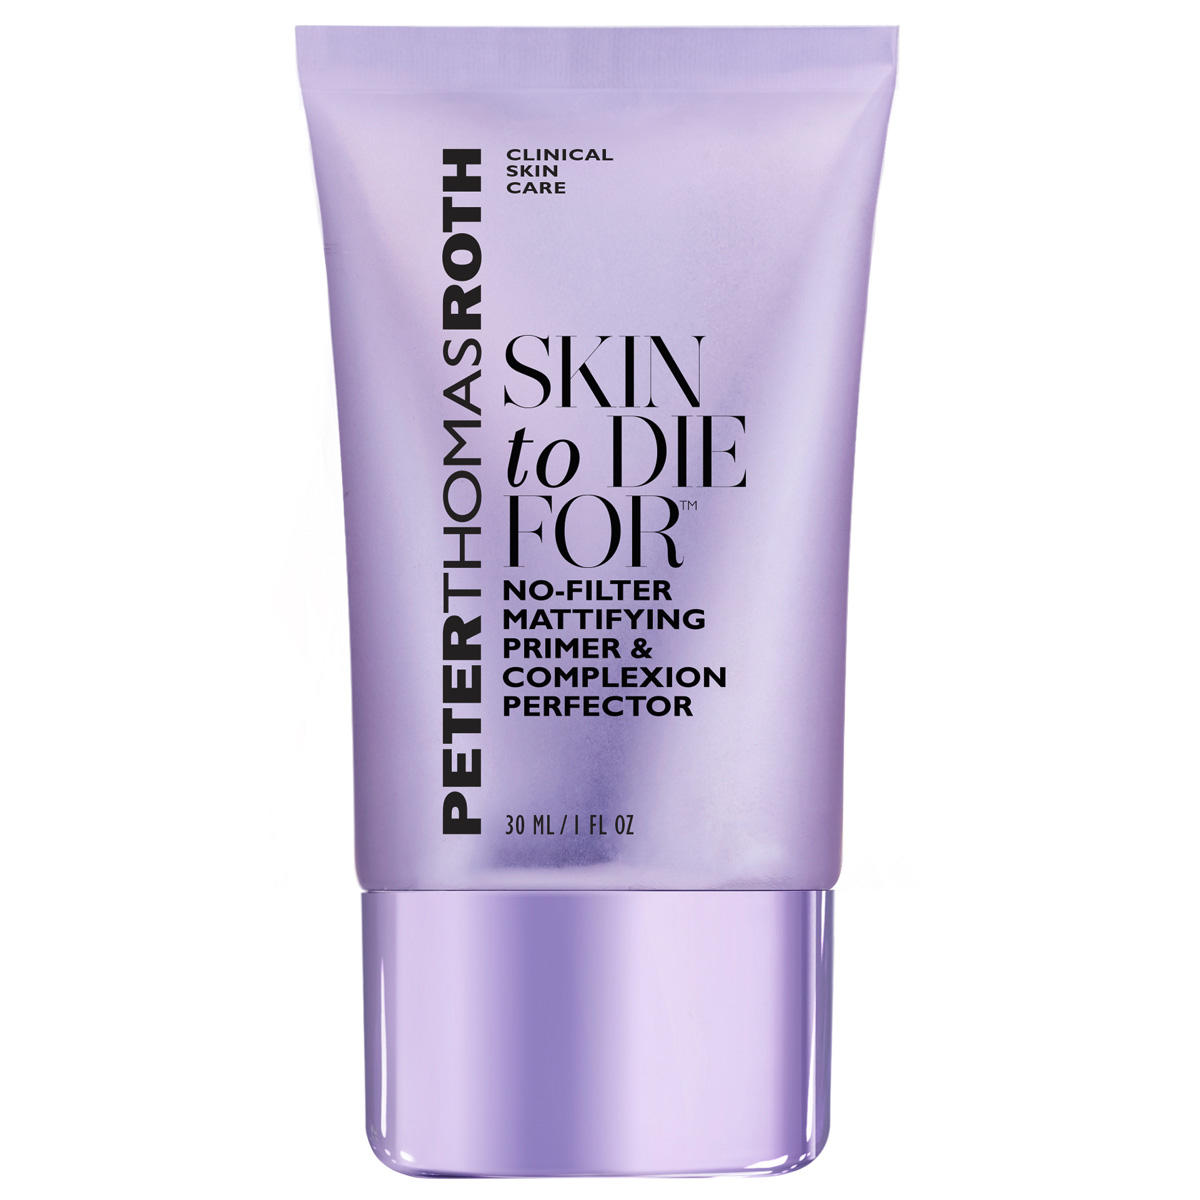 PETER THOMAS ROTH CLINICAL SKIN CARE Skin to Die For No-Filter Mattifying Primer & Complexion Perfector 30 ml - 1